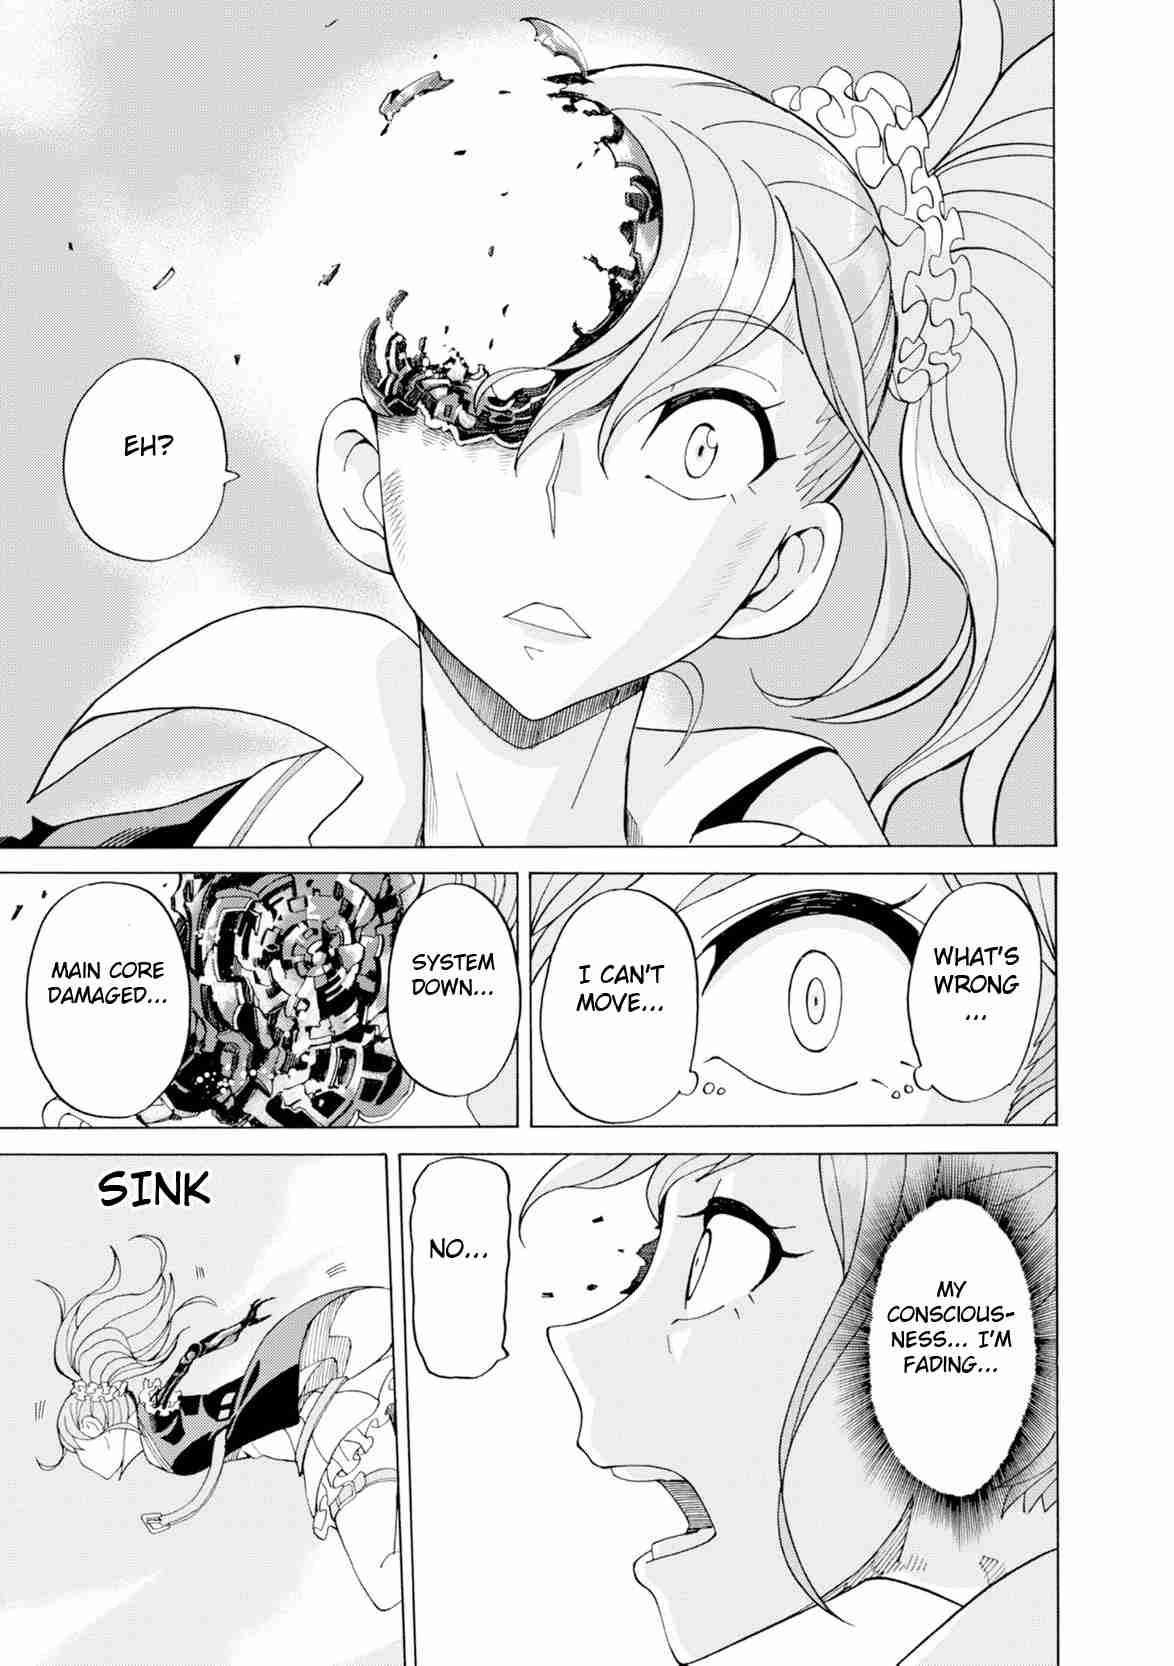 Asebi and Adventurers of Sky World Vol. 4 Ch. 19 Determination and curtain fall